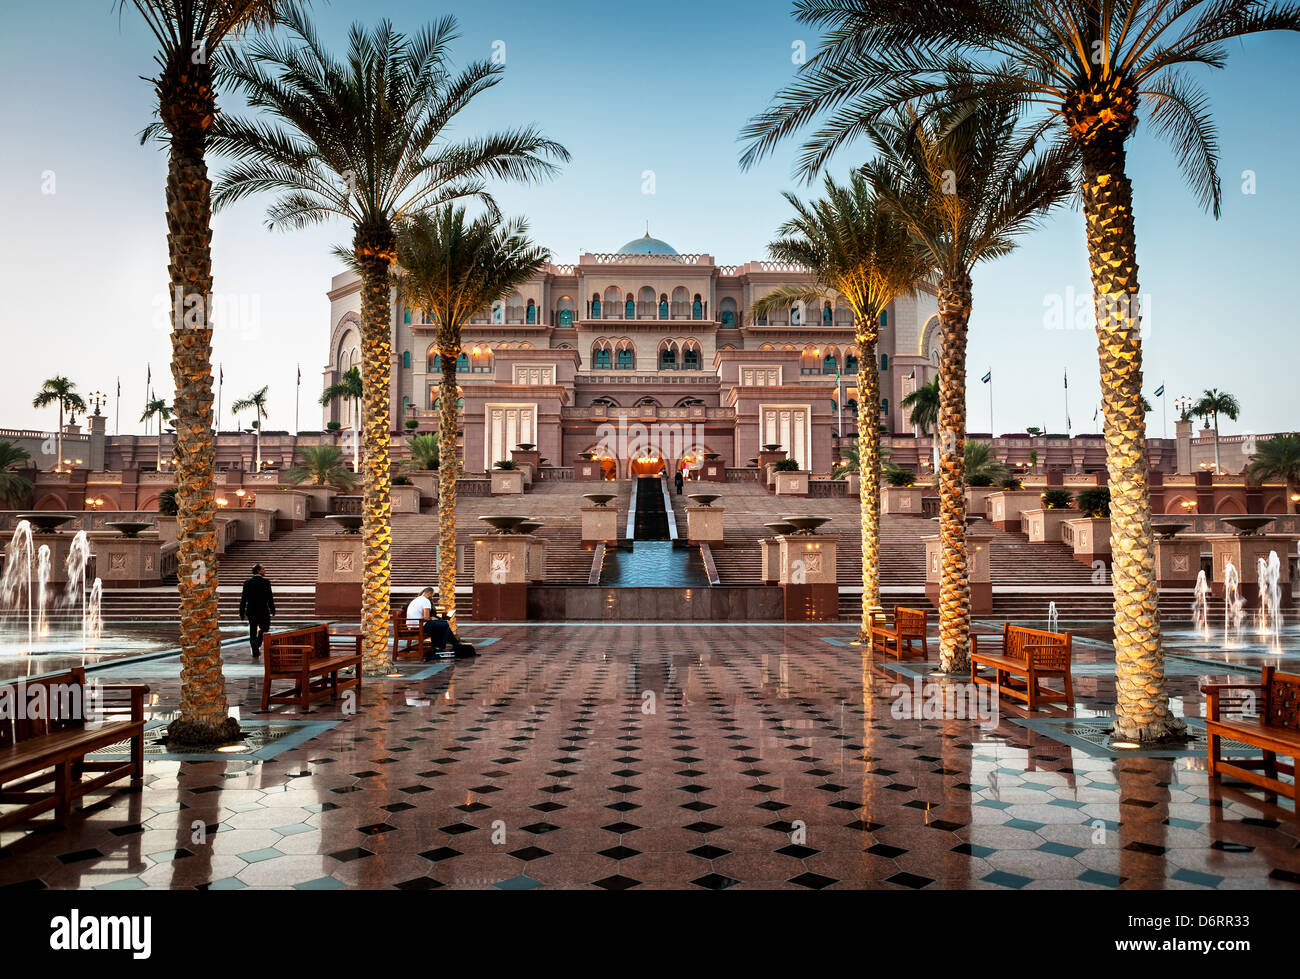 Emirates palace is one of the most expensive hotel in Arab Emirates build at the cost of £3.9 billion. Stock Photo